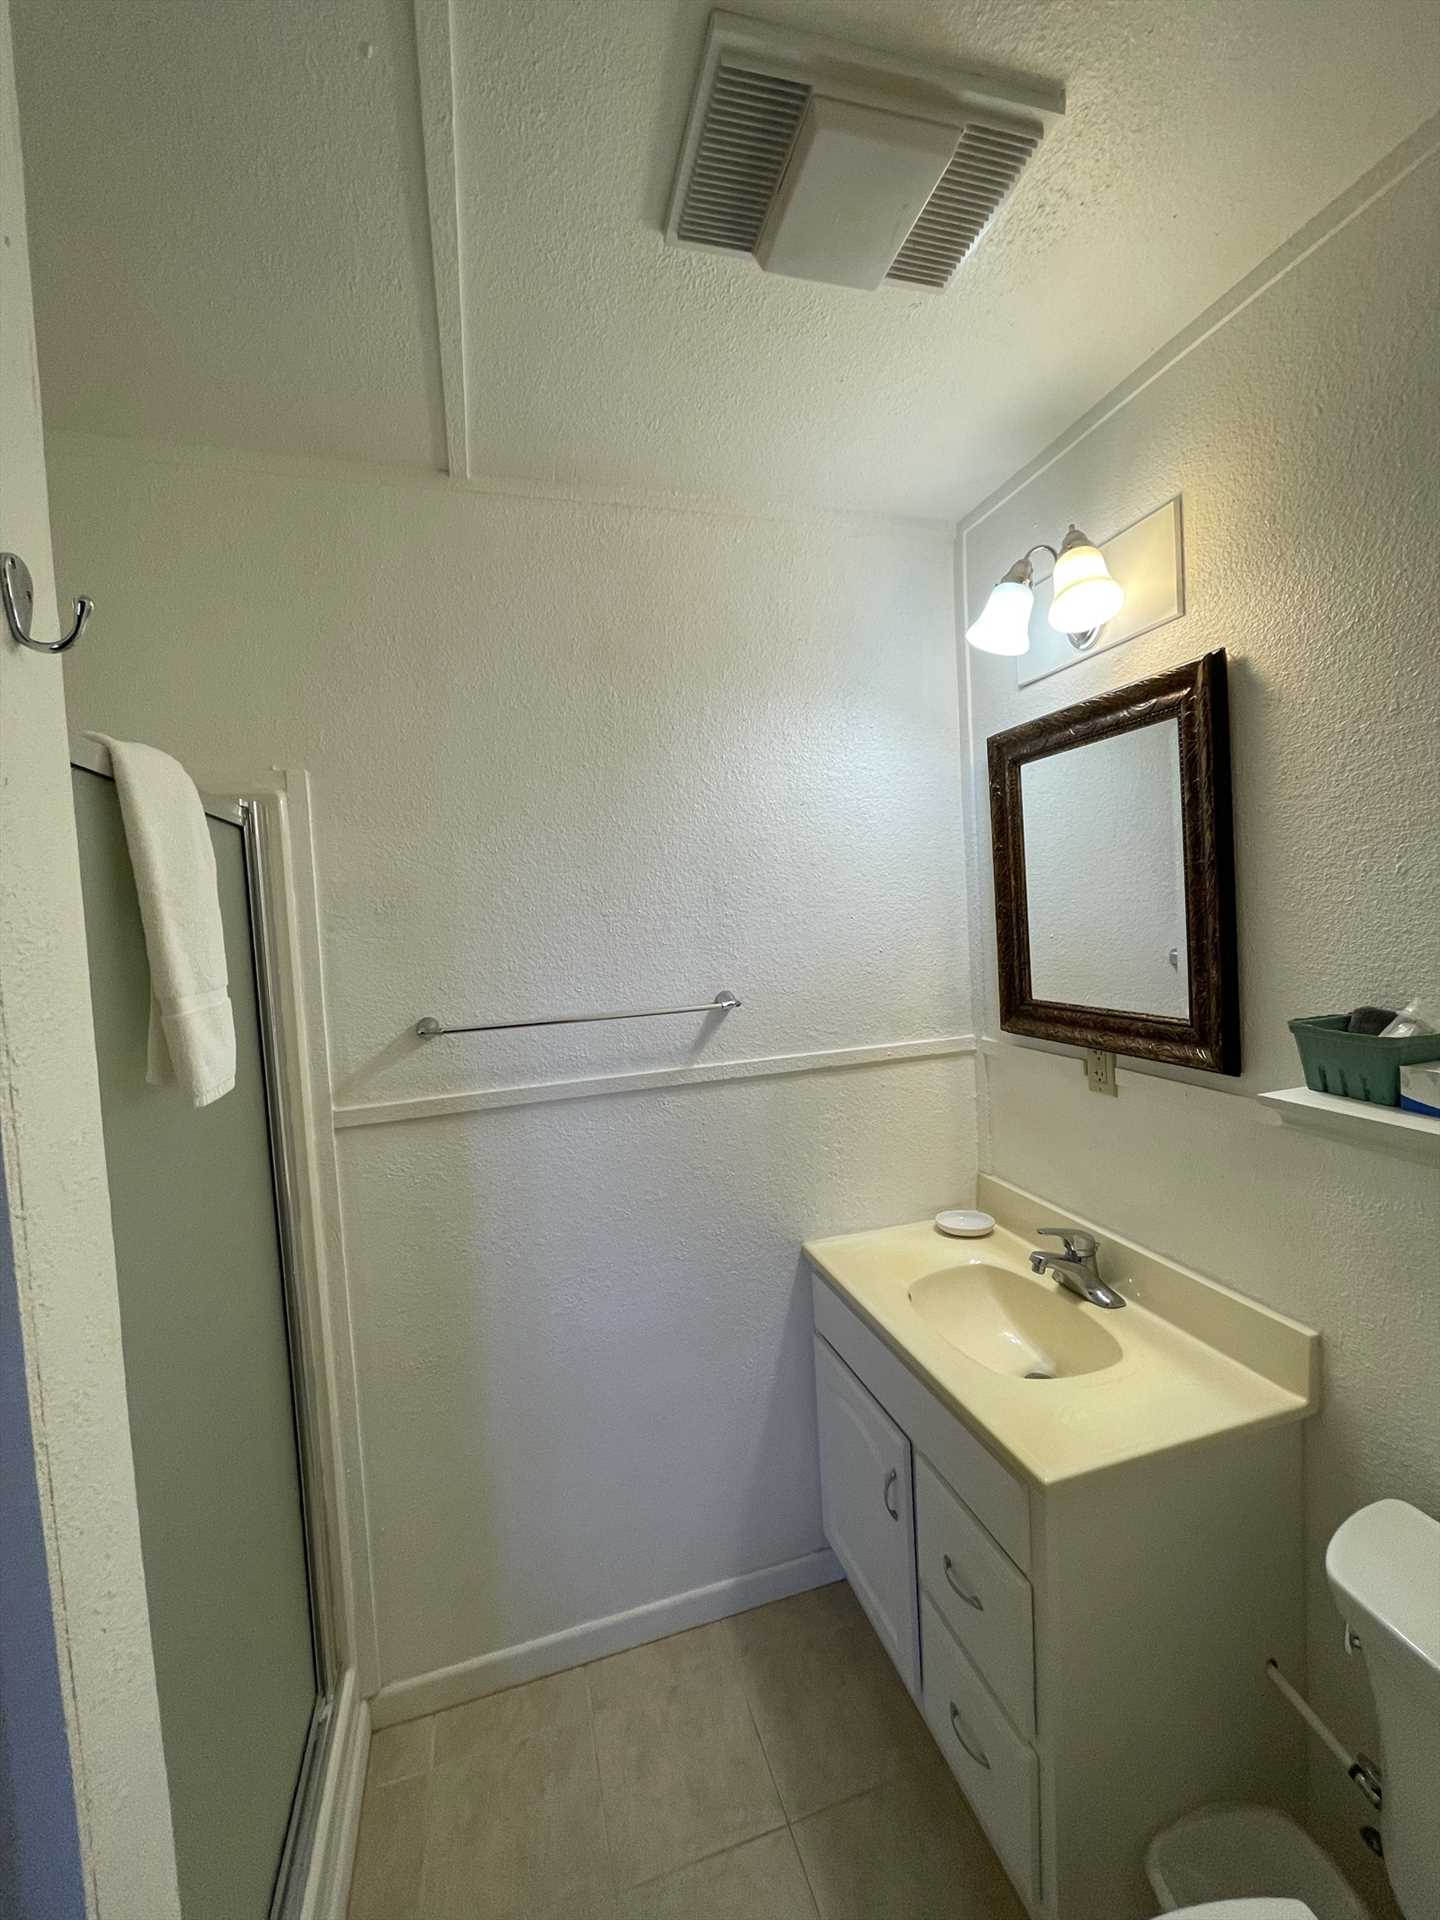                                                 A spotless shower stall and complimentary bath linens in the full bath make cleanup a snap!